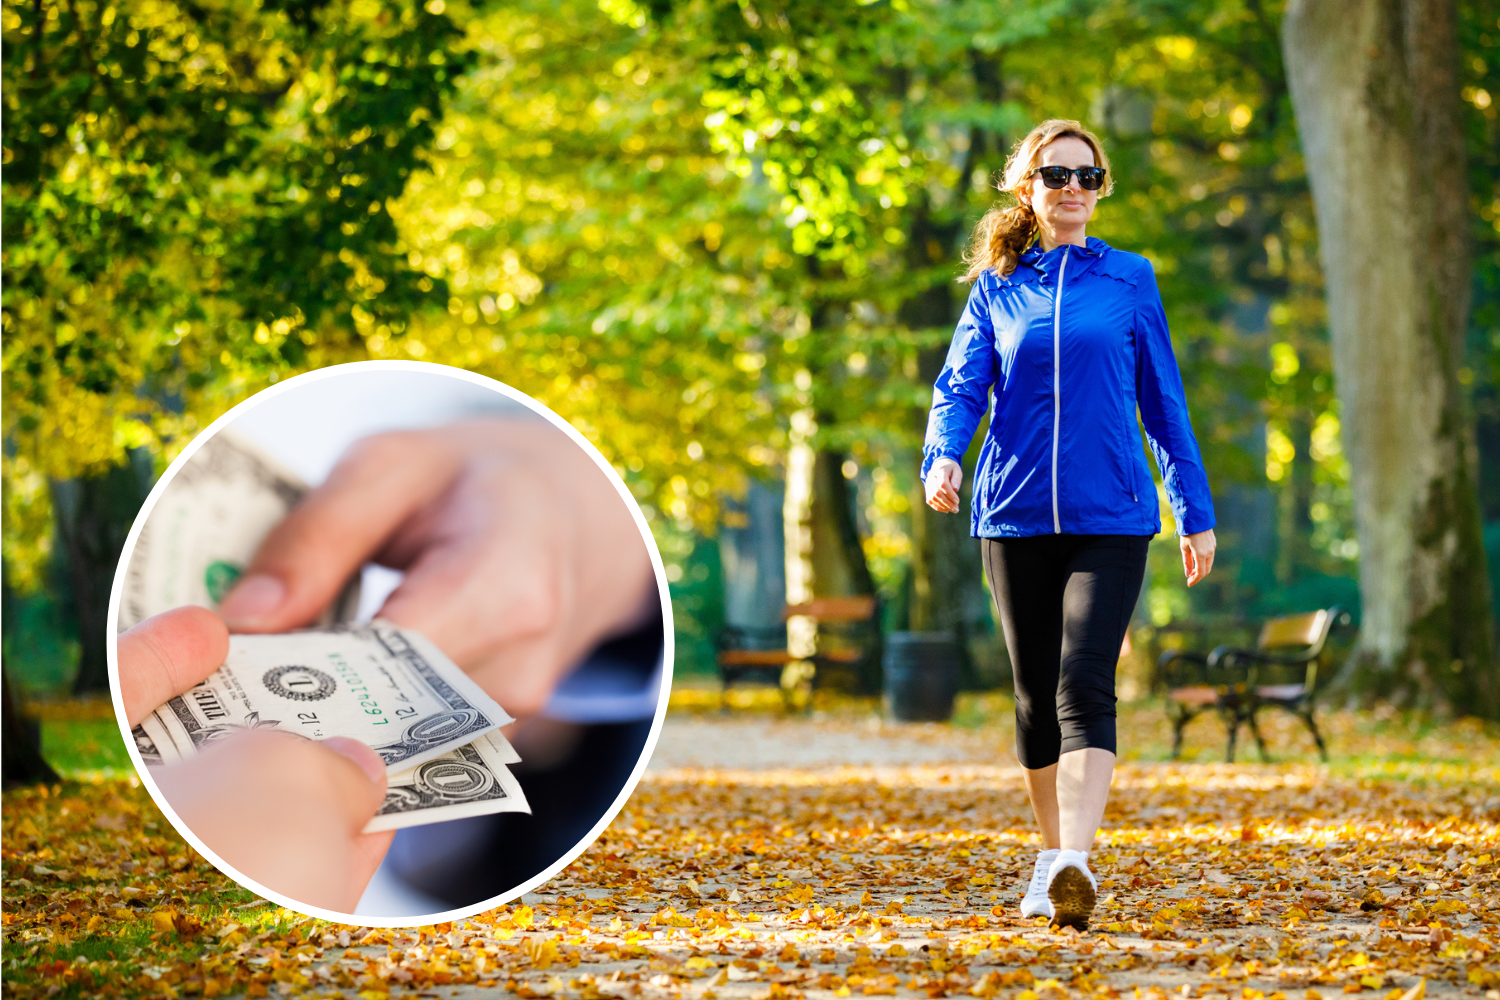 You can get paid ten thousand dollars to walk 10,000 steps in a day